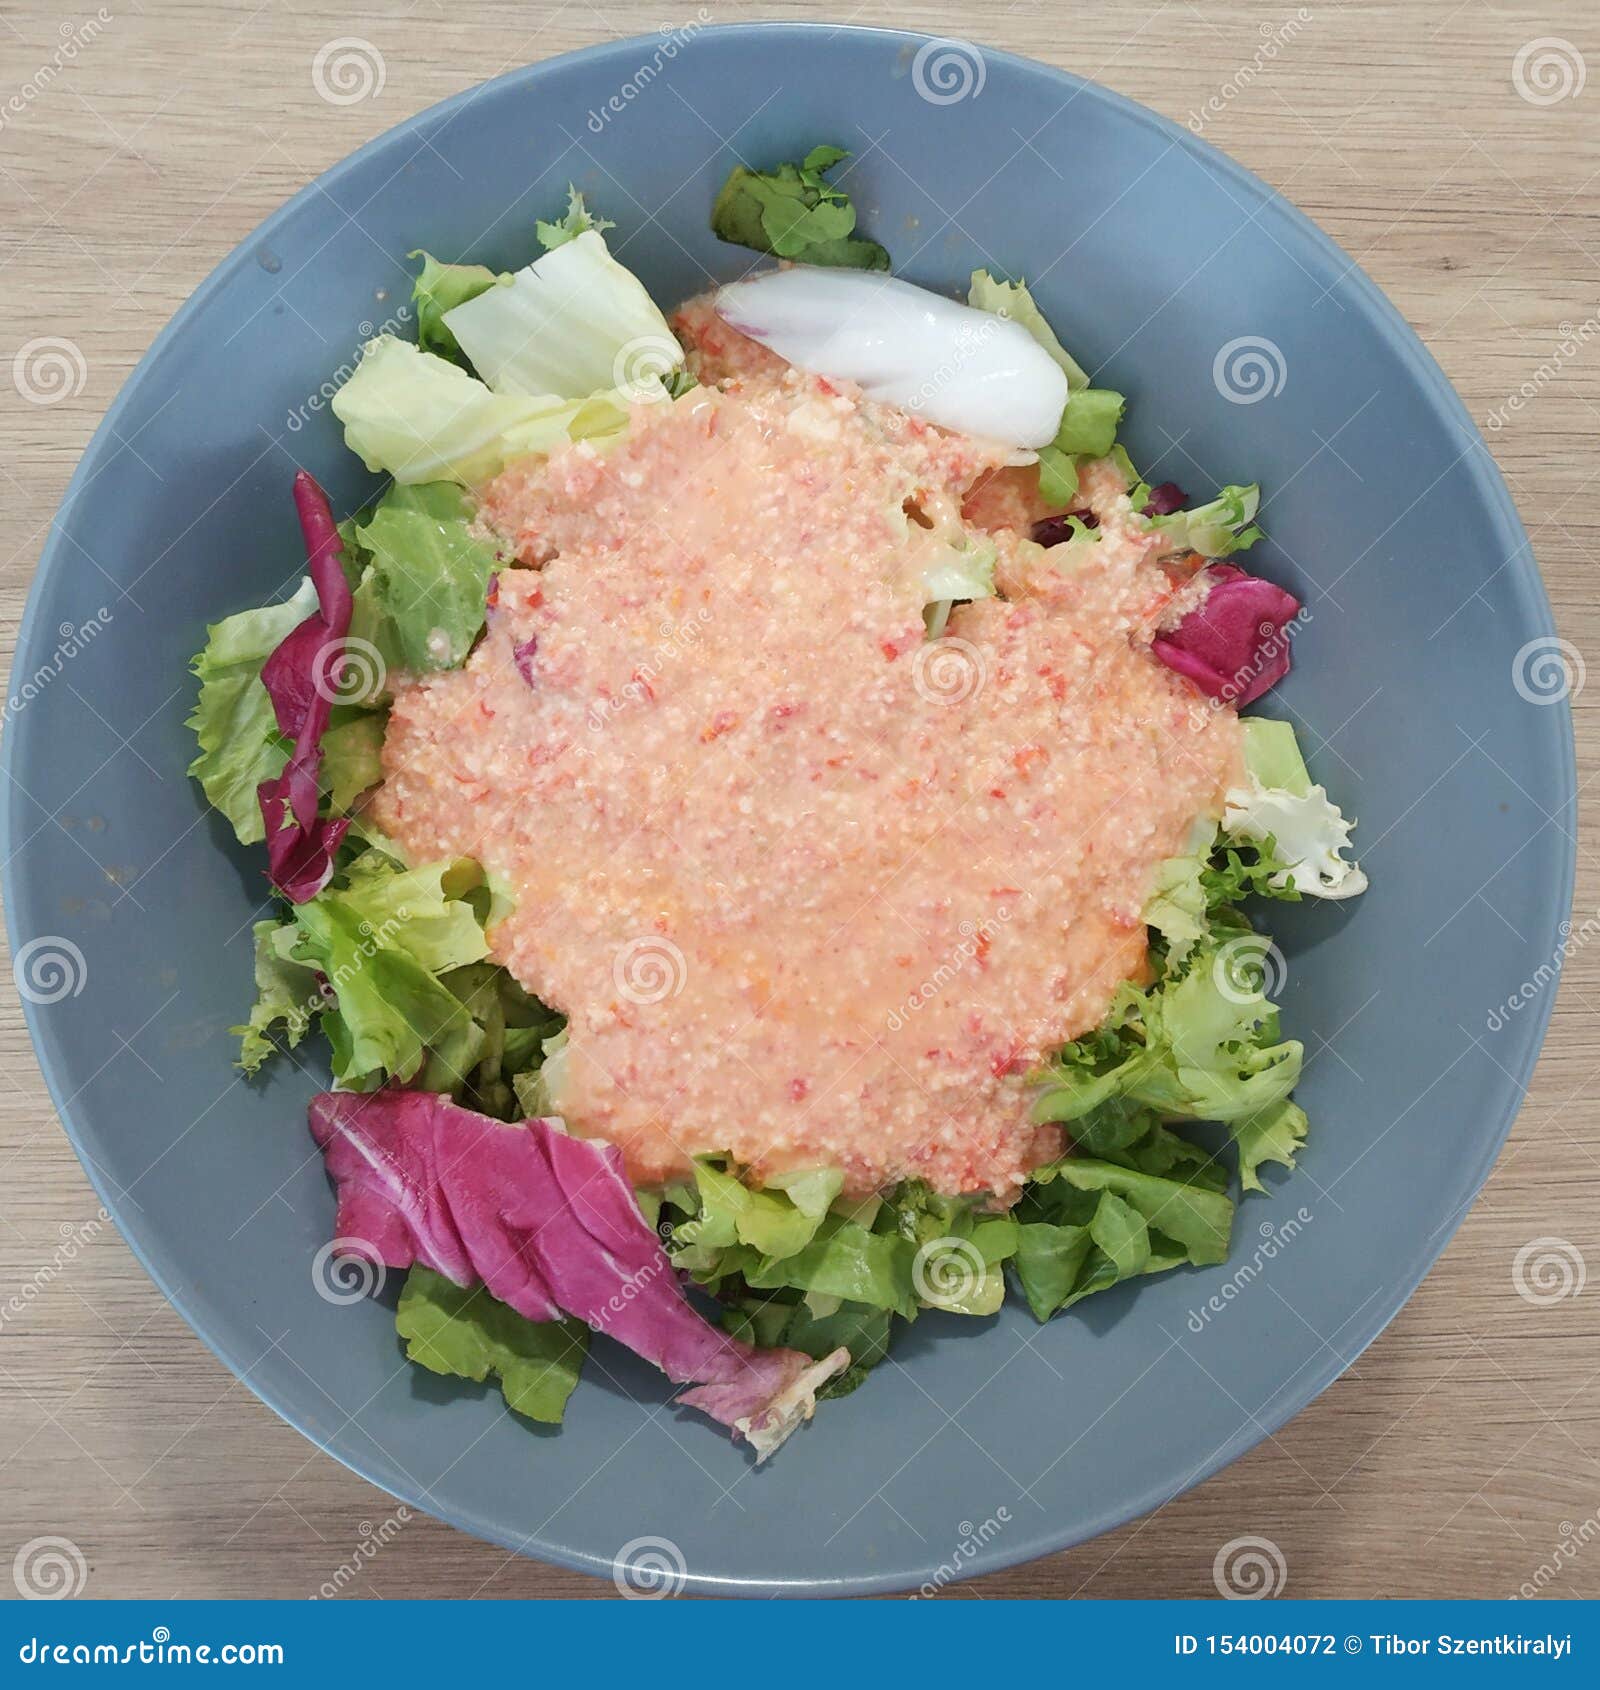 Ketogenic Meal Paprika Tomato Cottage Cheese Lettuce Keto Food